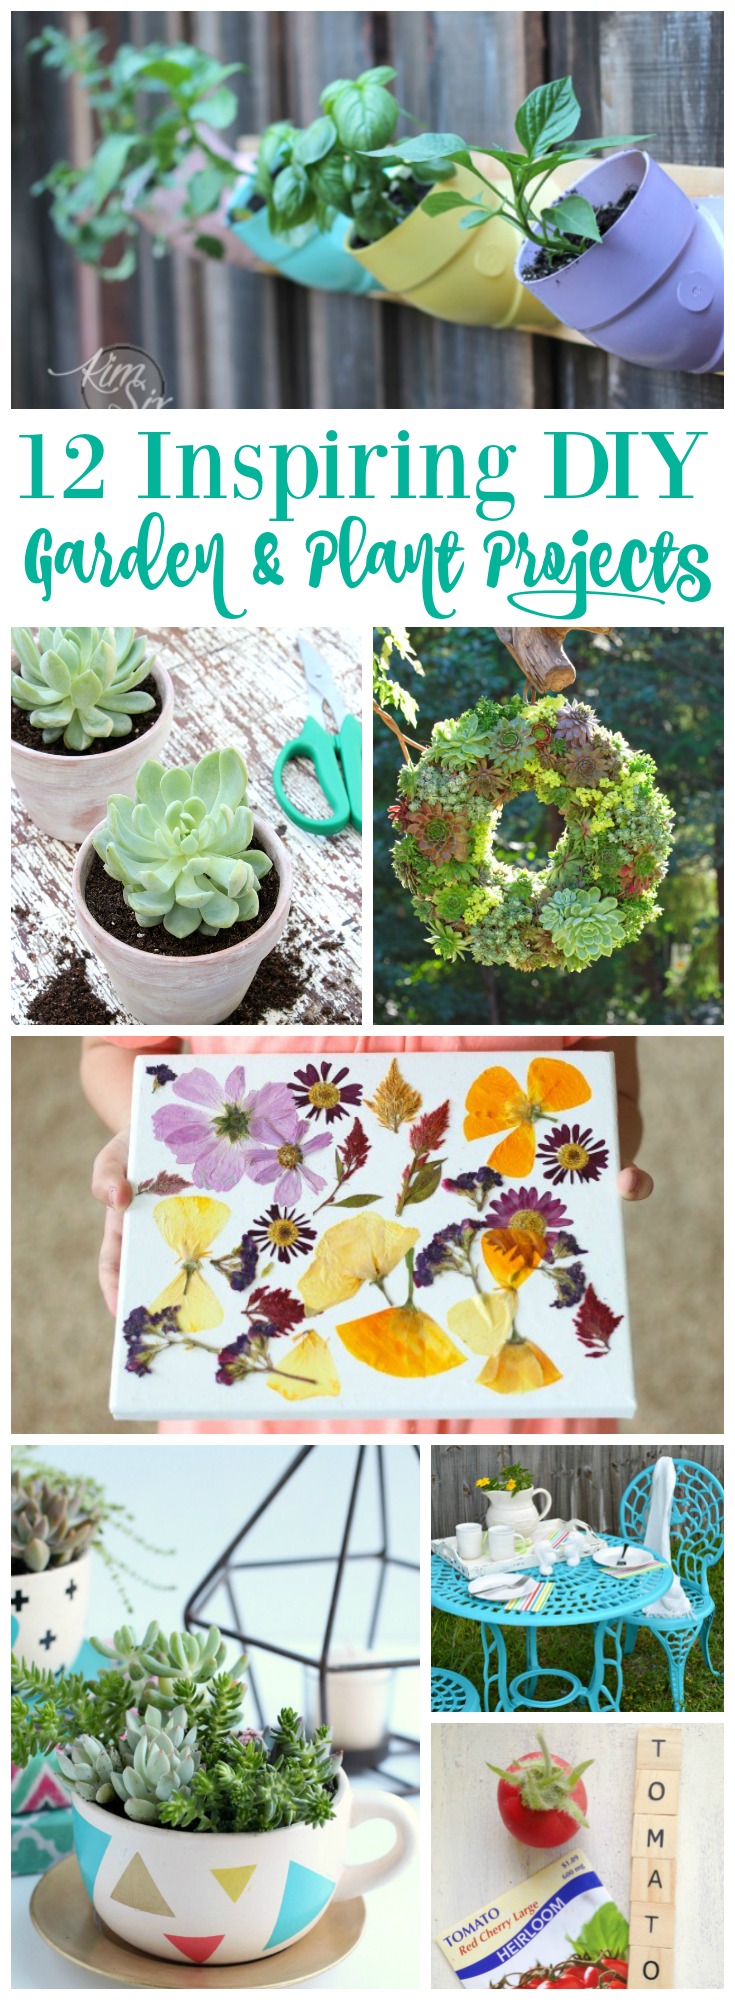 GARDEN & PLANT PROJECTS